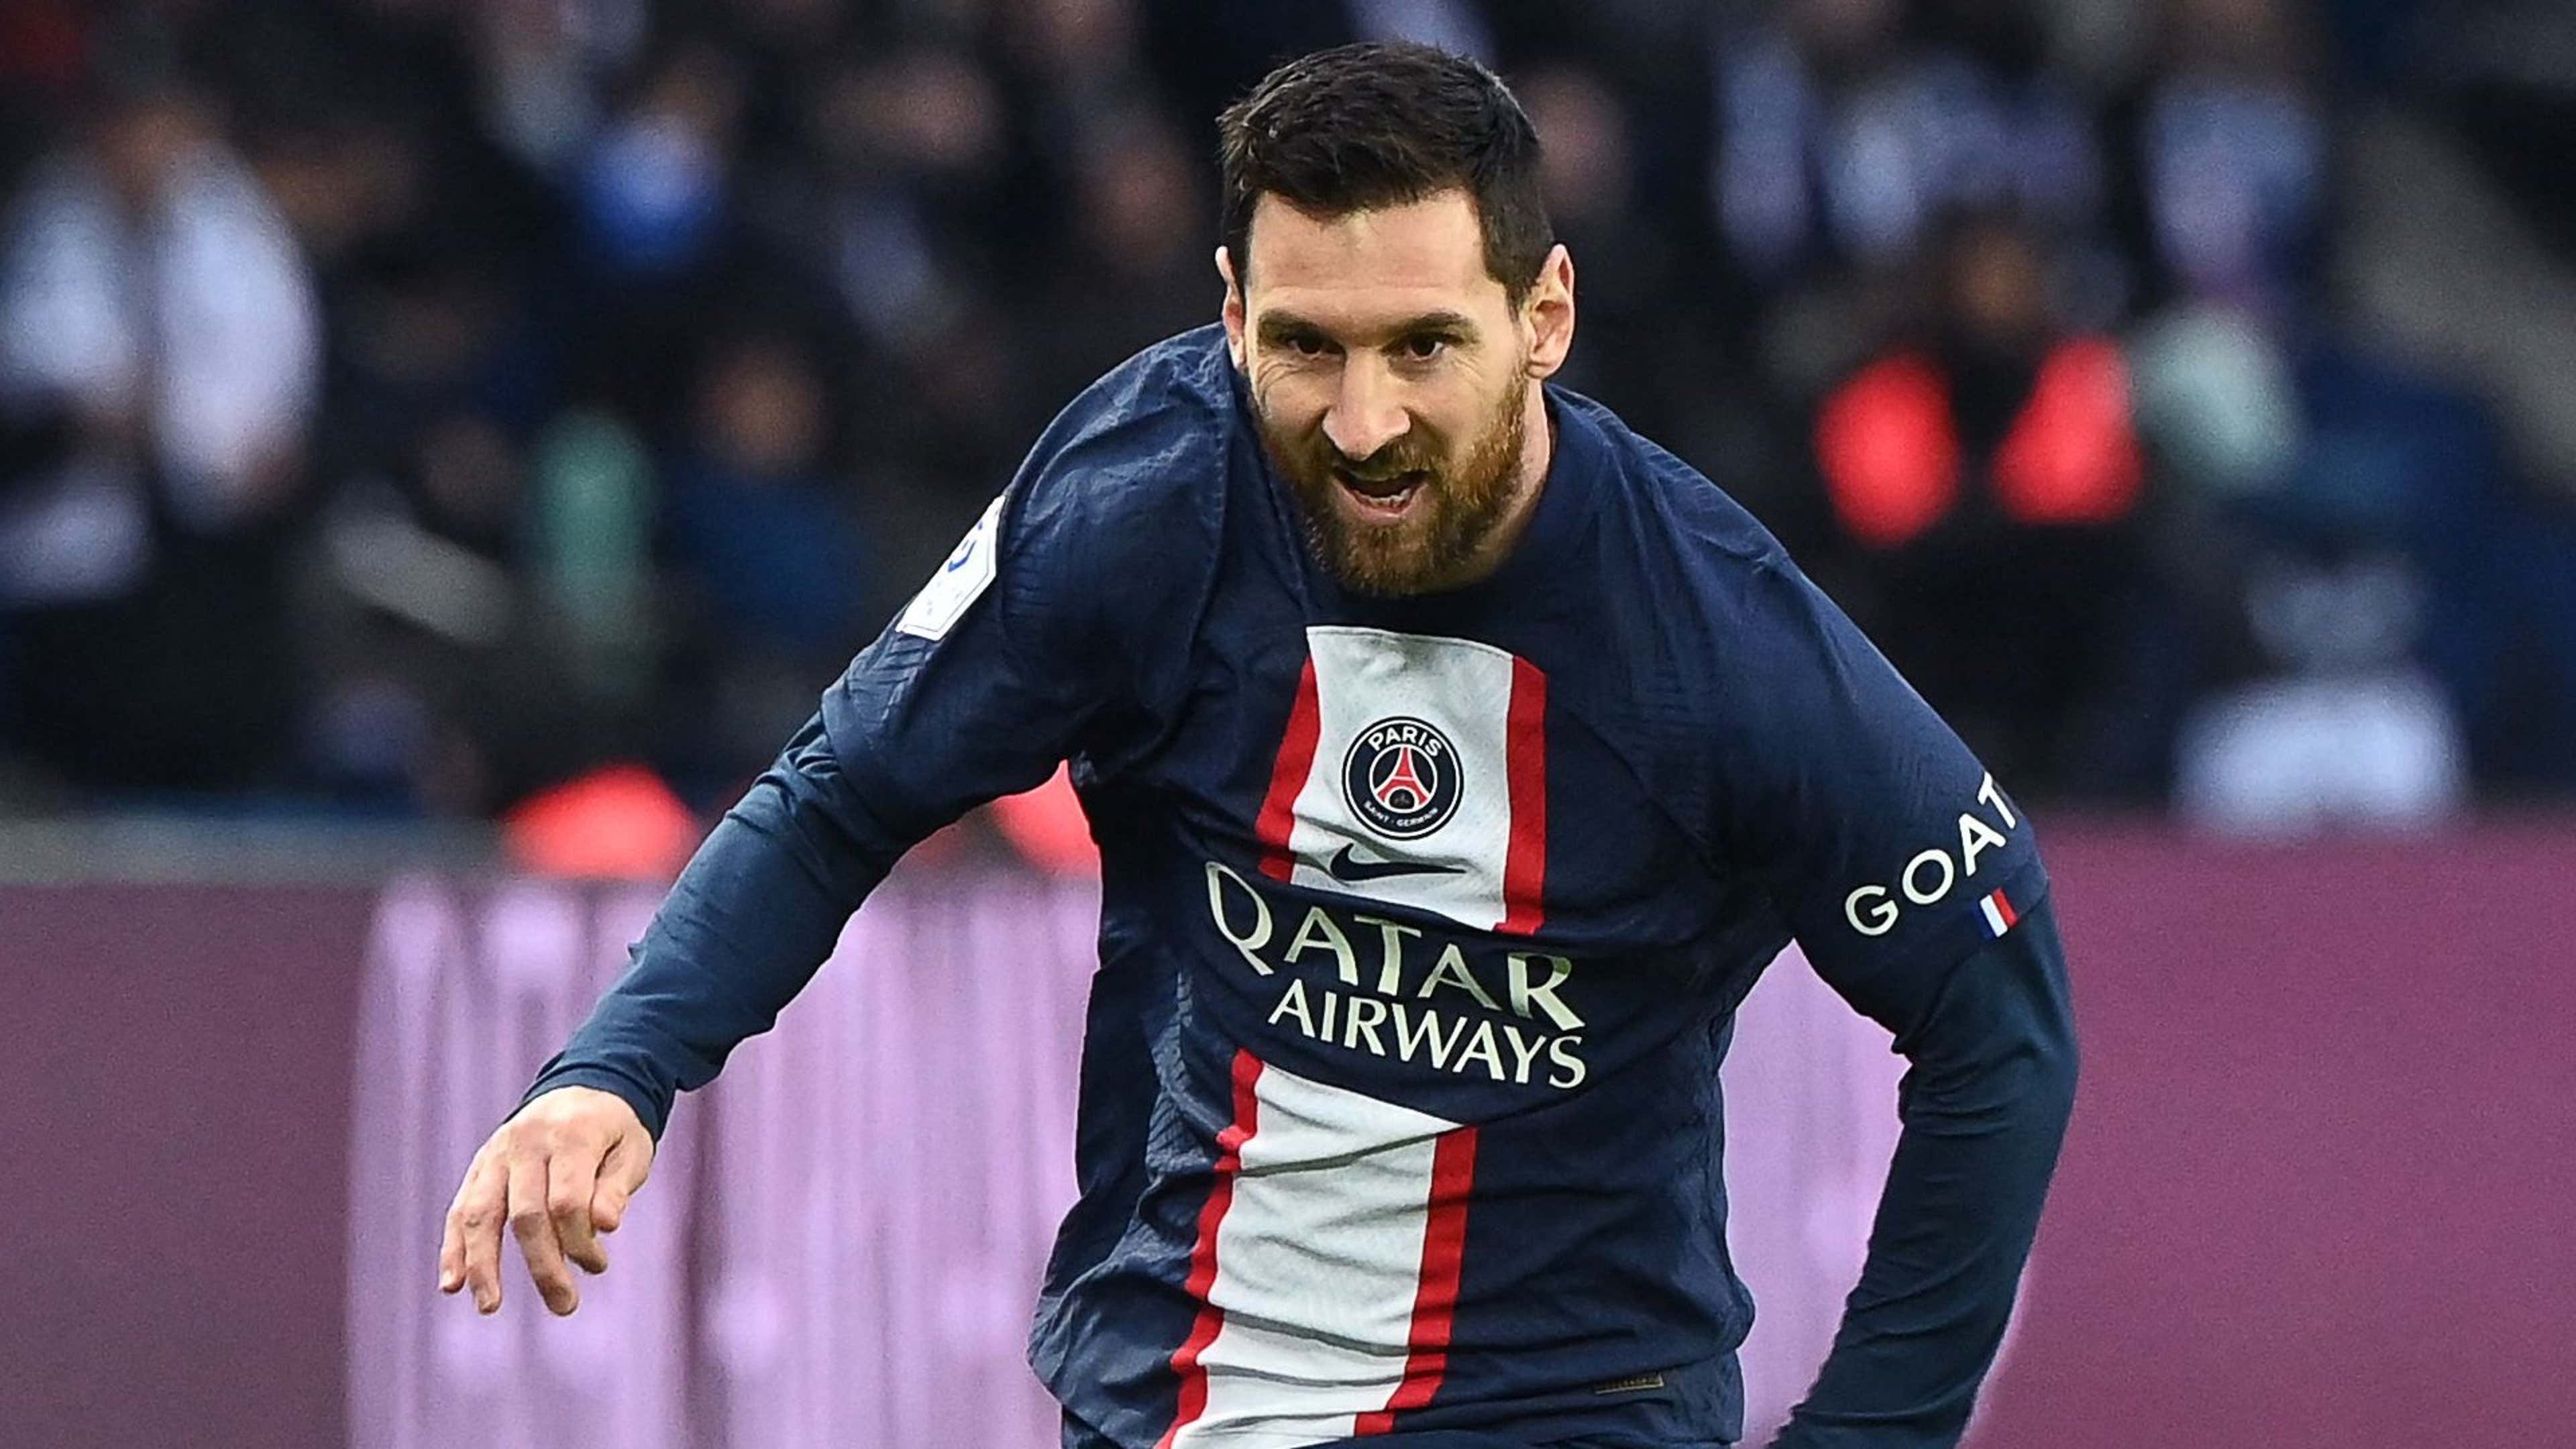 Messi is No.10 again! Coupe de France reshuffle sees PSG stars swap numbers  as Leo claims his famous shirt